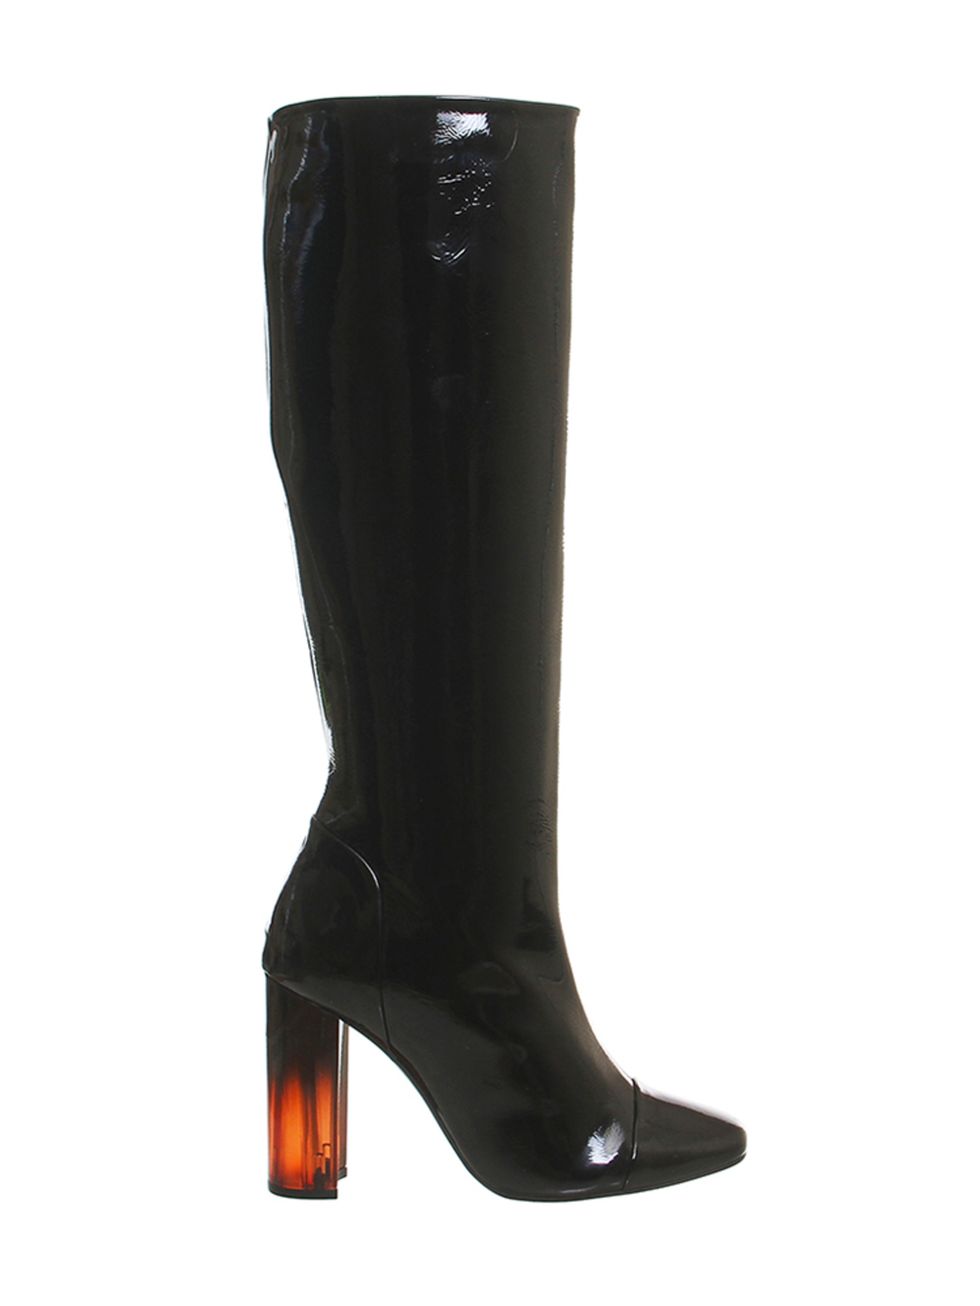 <p><a href="http://www.office.co.uk/view/product/office_catalog/2,17/2345905357" target="_blank">Office boots</a>, £135</p>